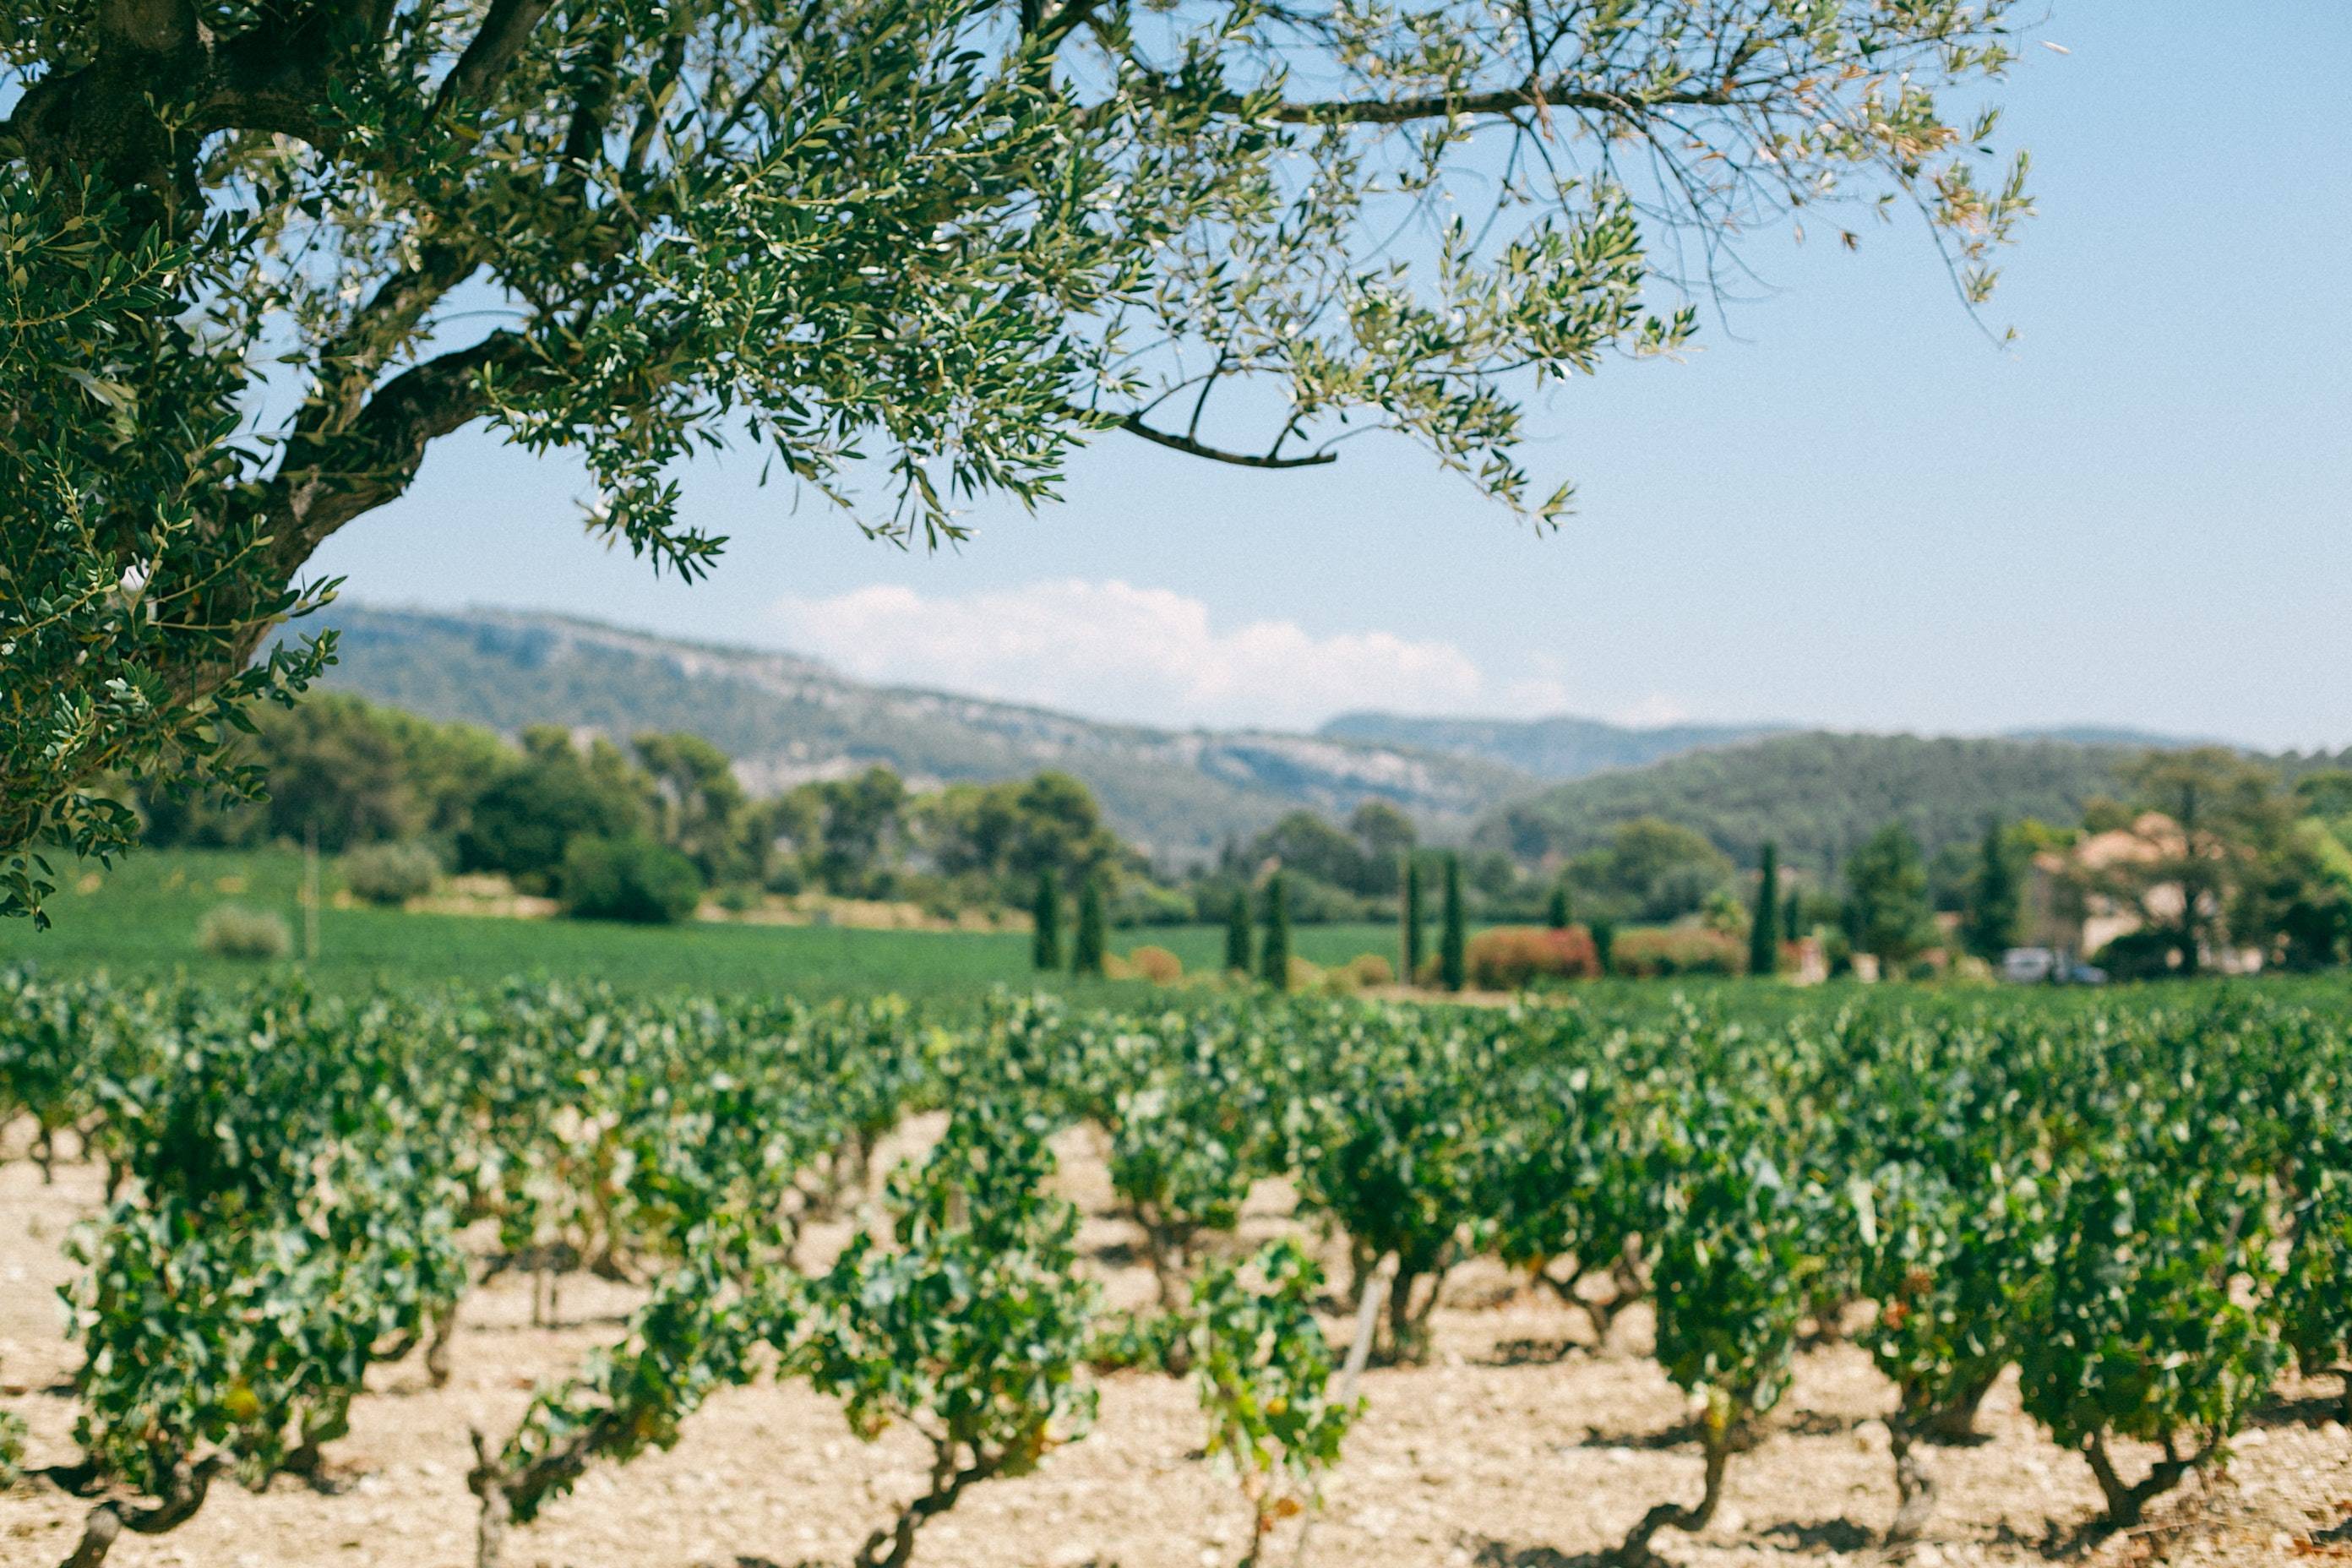 Vineyard situated in Tuscany surrounded by vines and. an olive tree.  